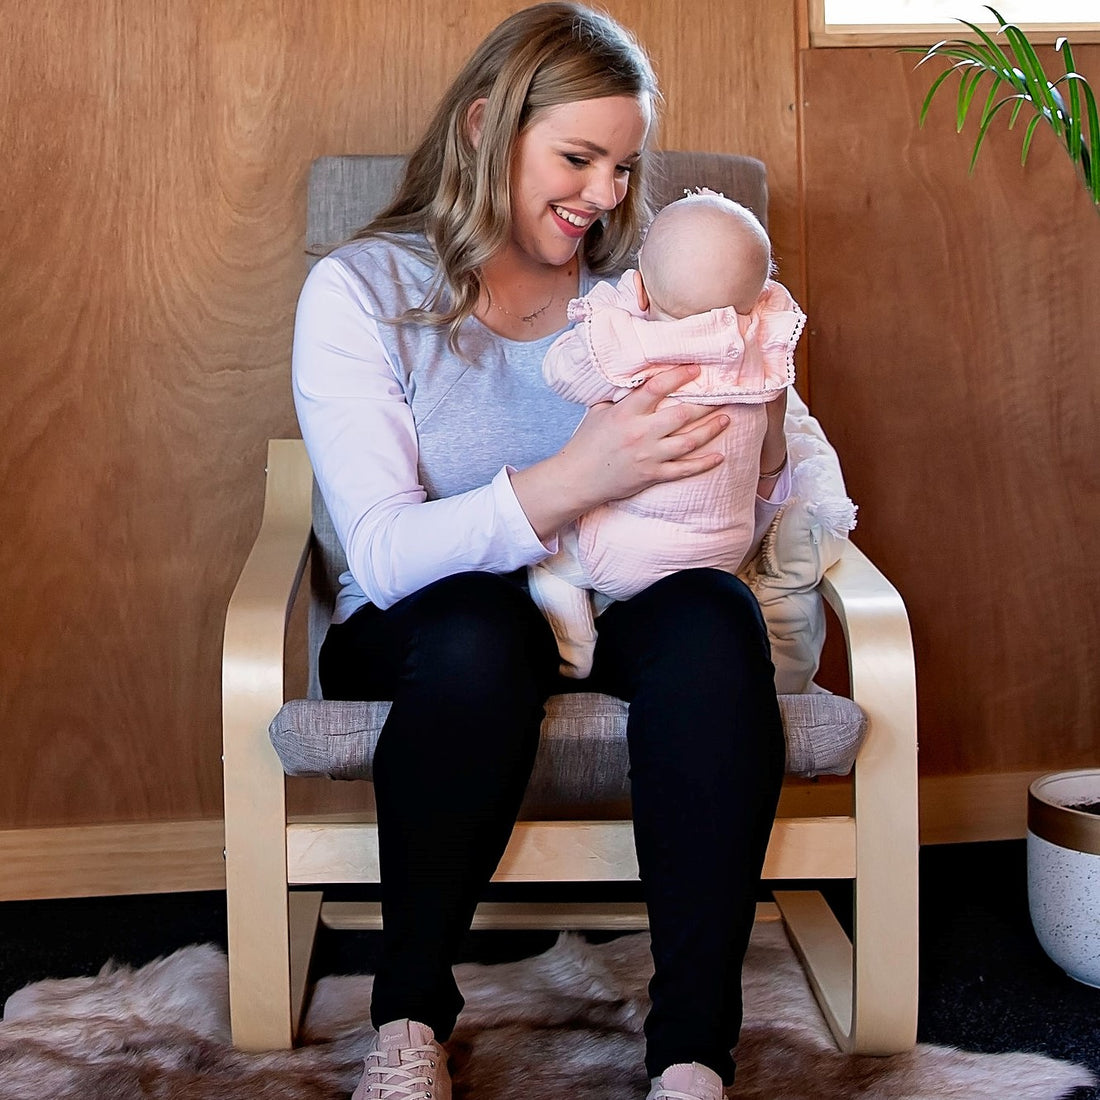 Breastfeeding clothes NZ. Tips to care for your newborn